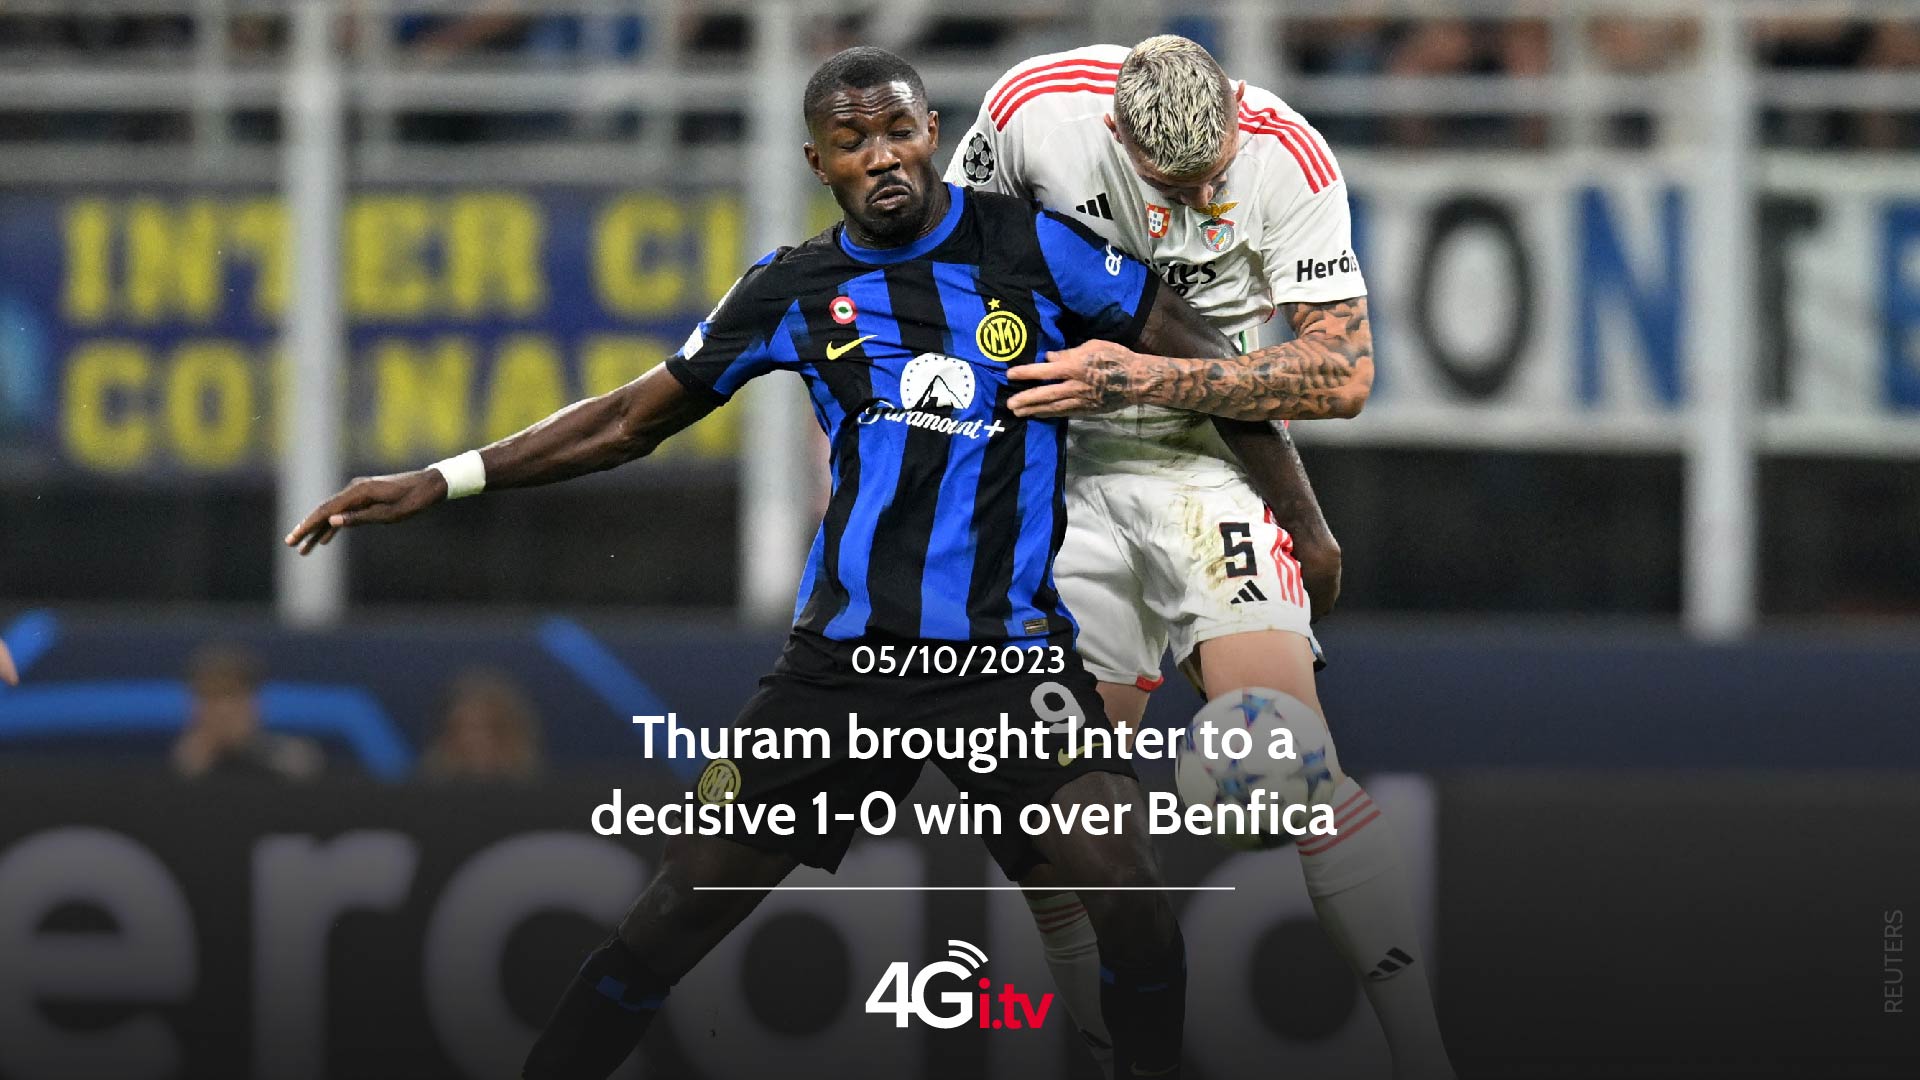 Read more about the article Thuram brought Inter to a decisive 1-0 win over Benfica